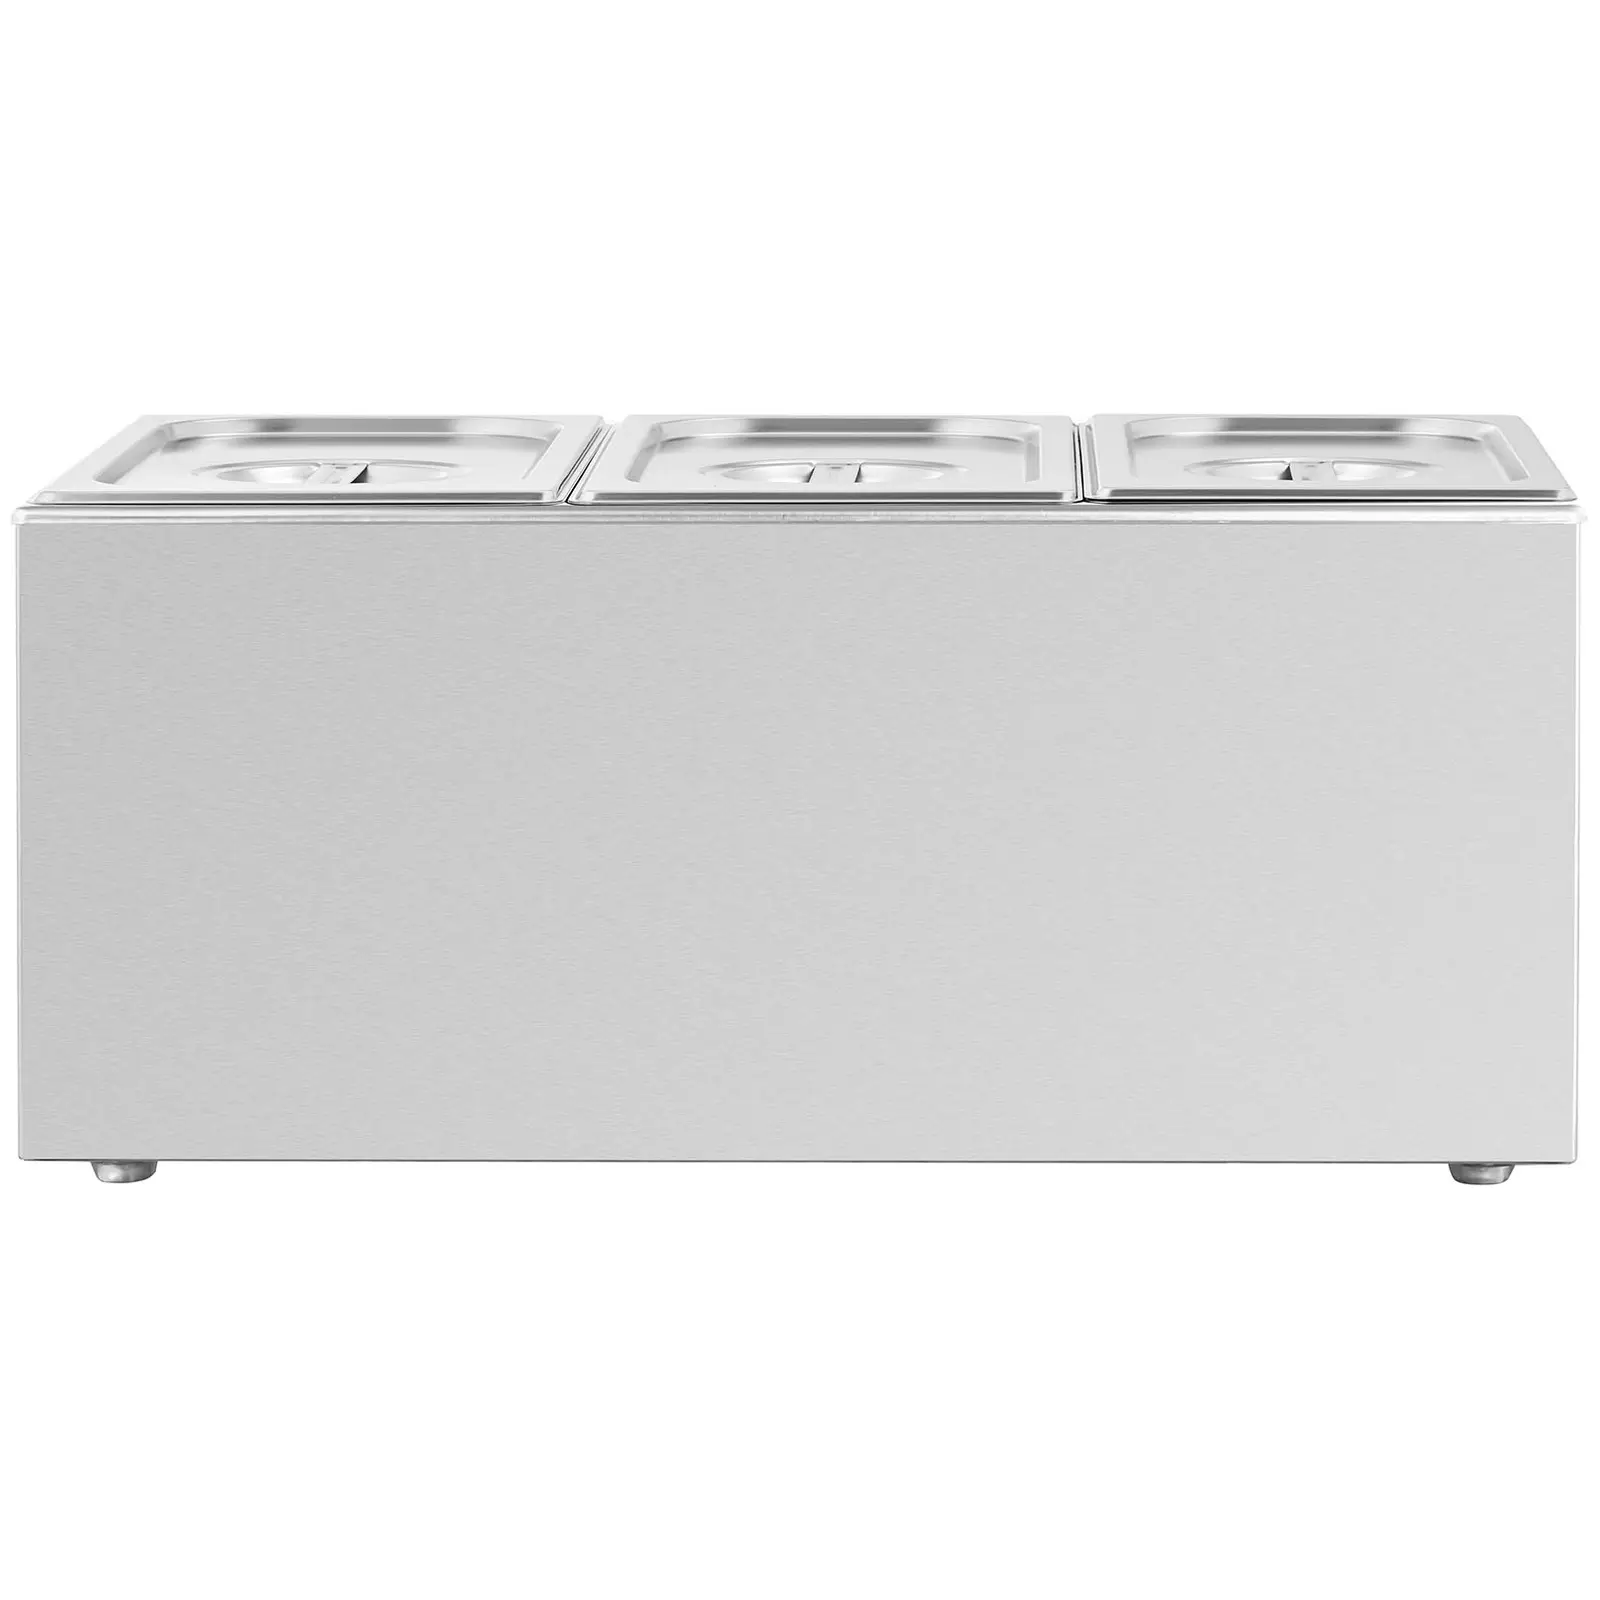 Bain marie - 640 W - 3 x GN 1/3 - Royal Catering